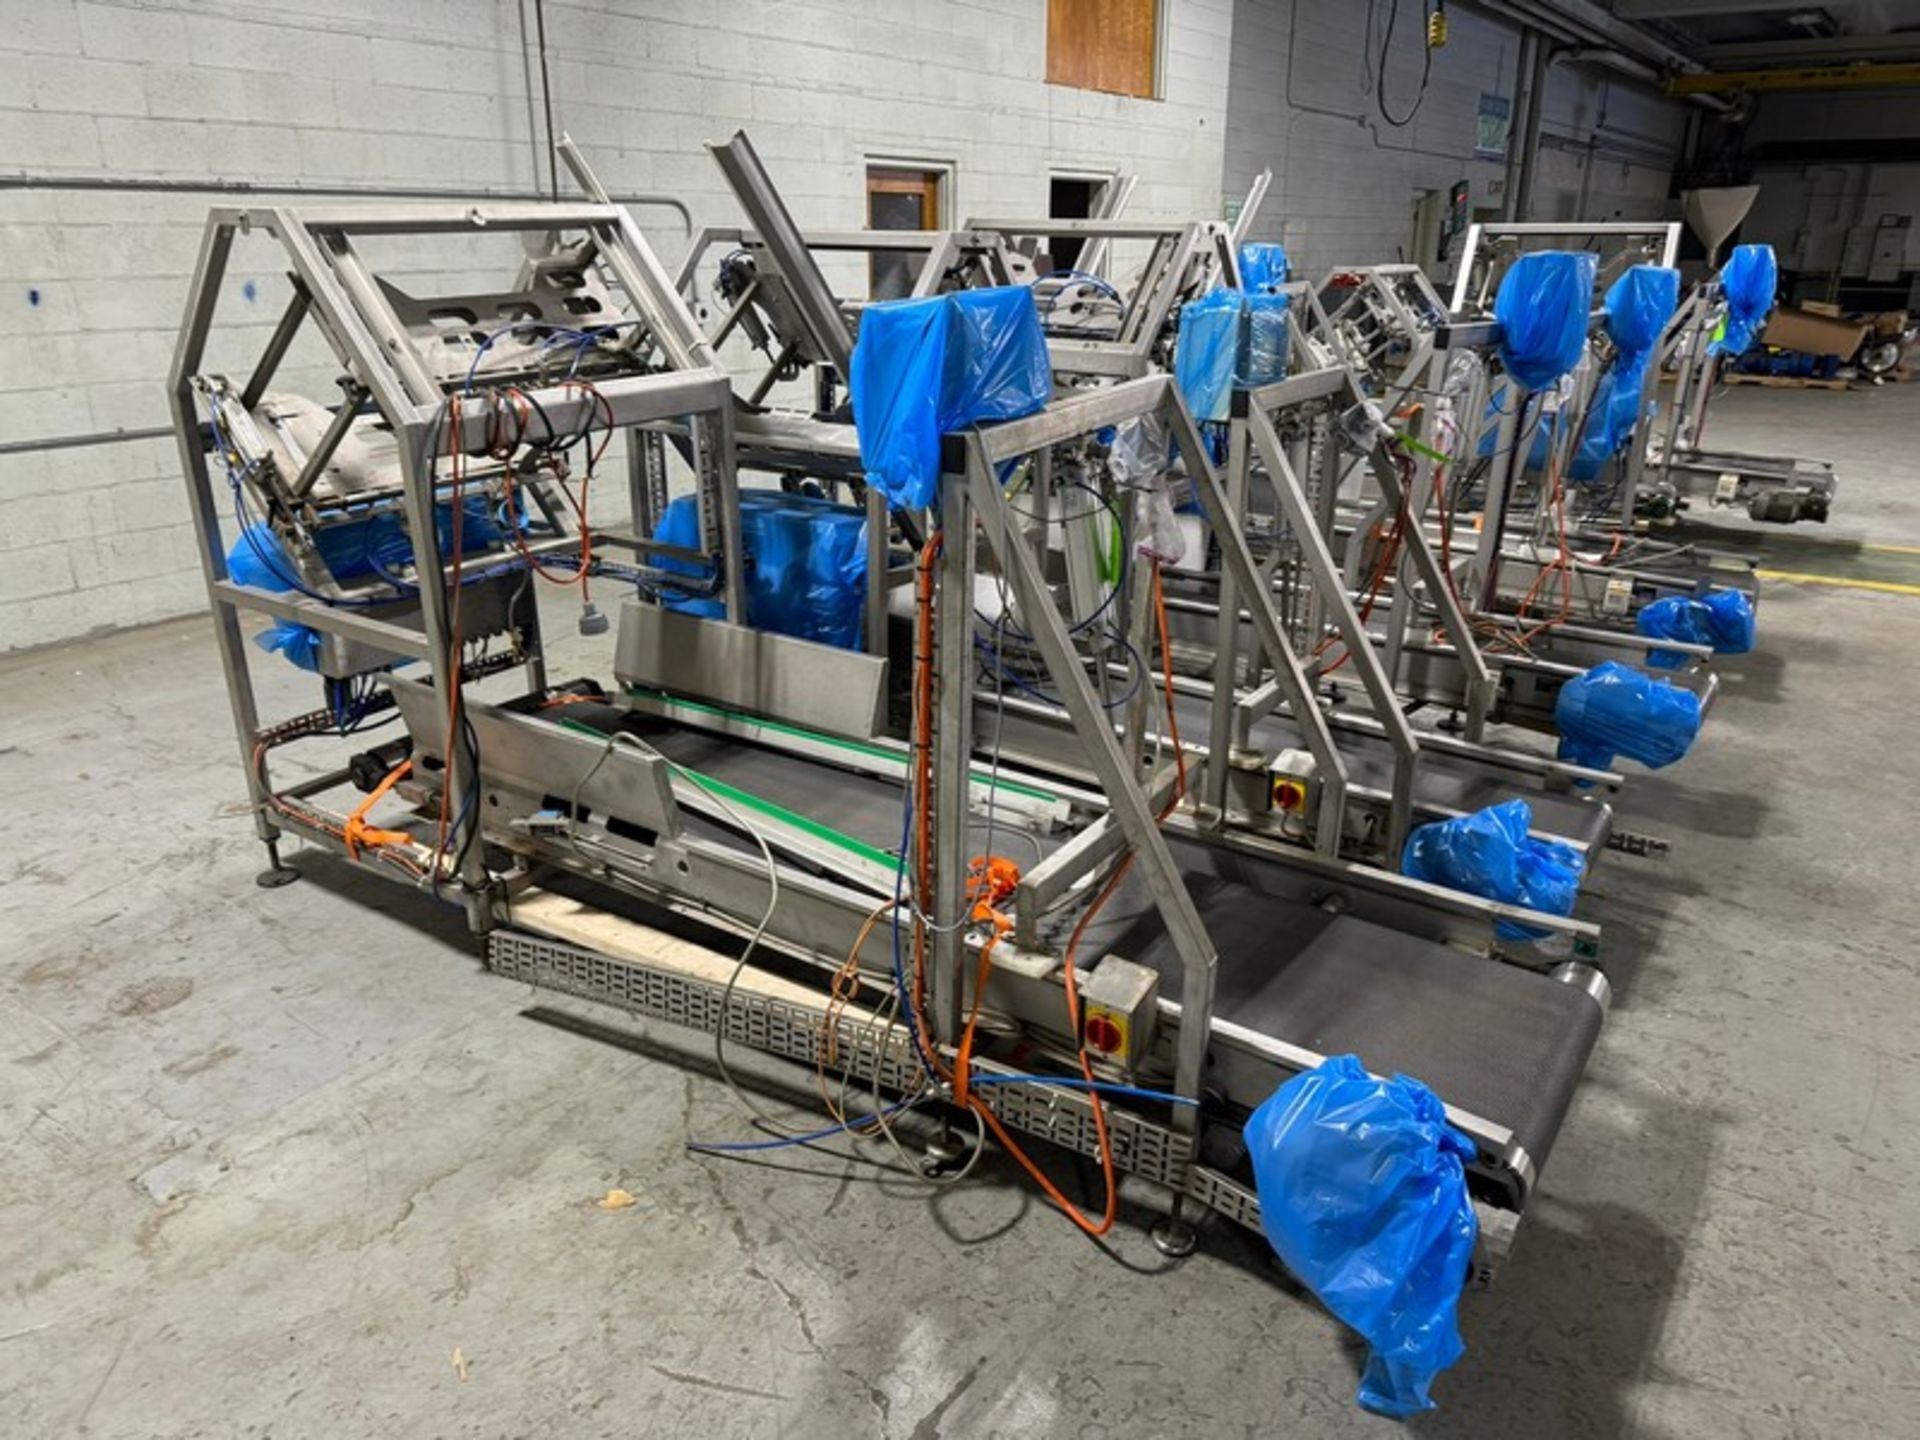 Optimar Case Erector, Order Number: 21-1071-301 (2-Pce. Lot) (LOCATED IN GLOUCESTER, MA)